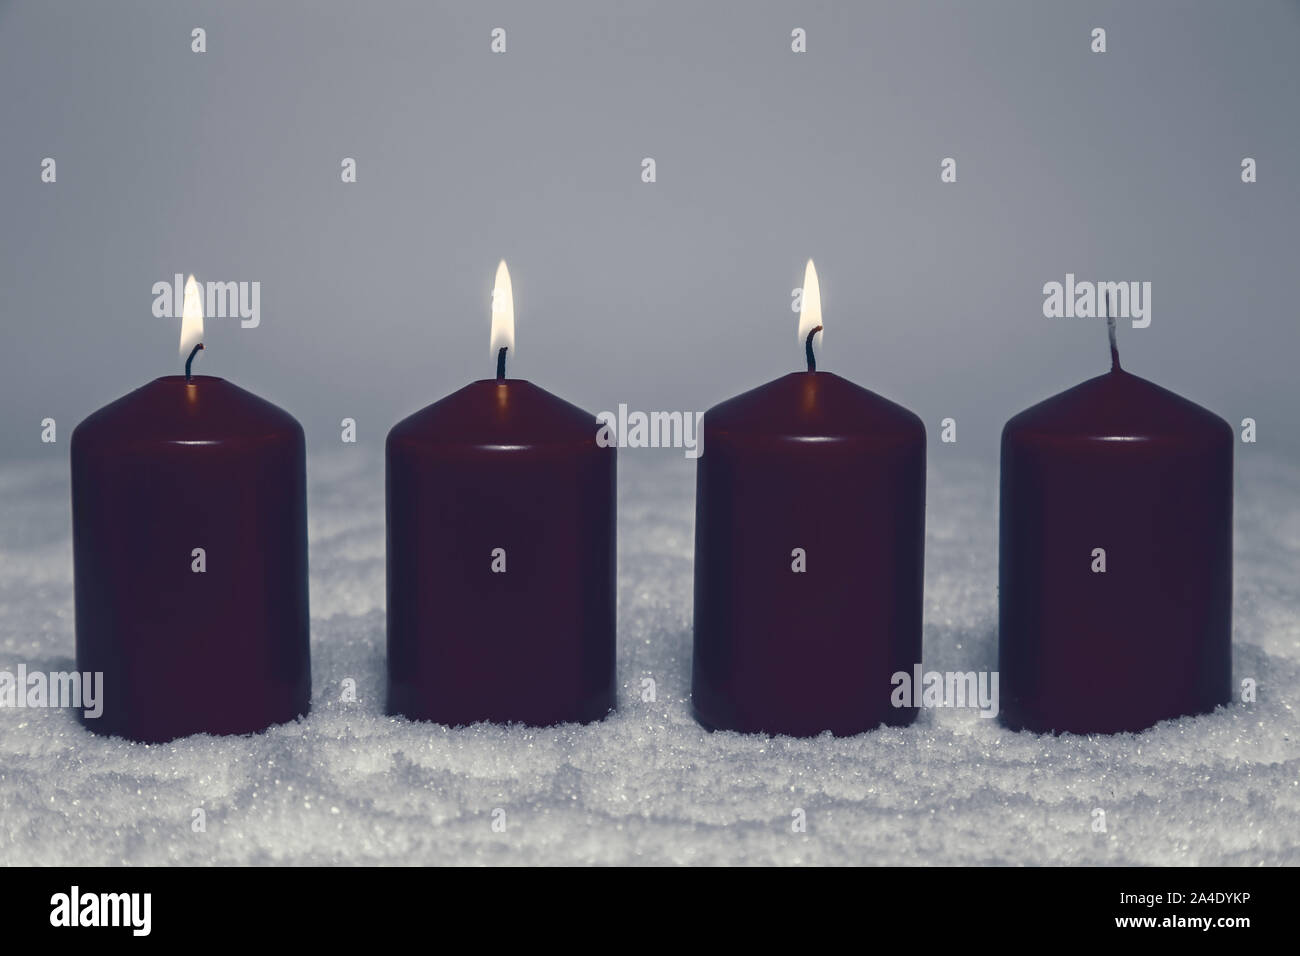 3rd advent with three burning candles in snow Stock Photo